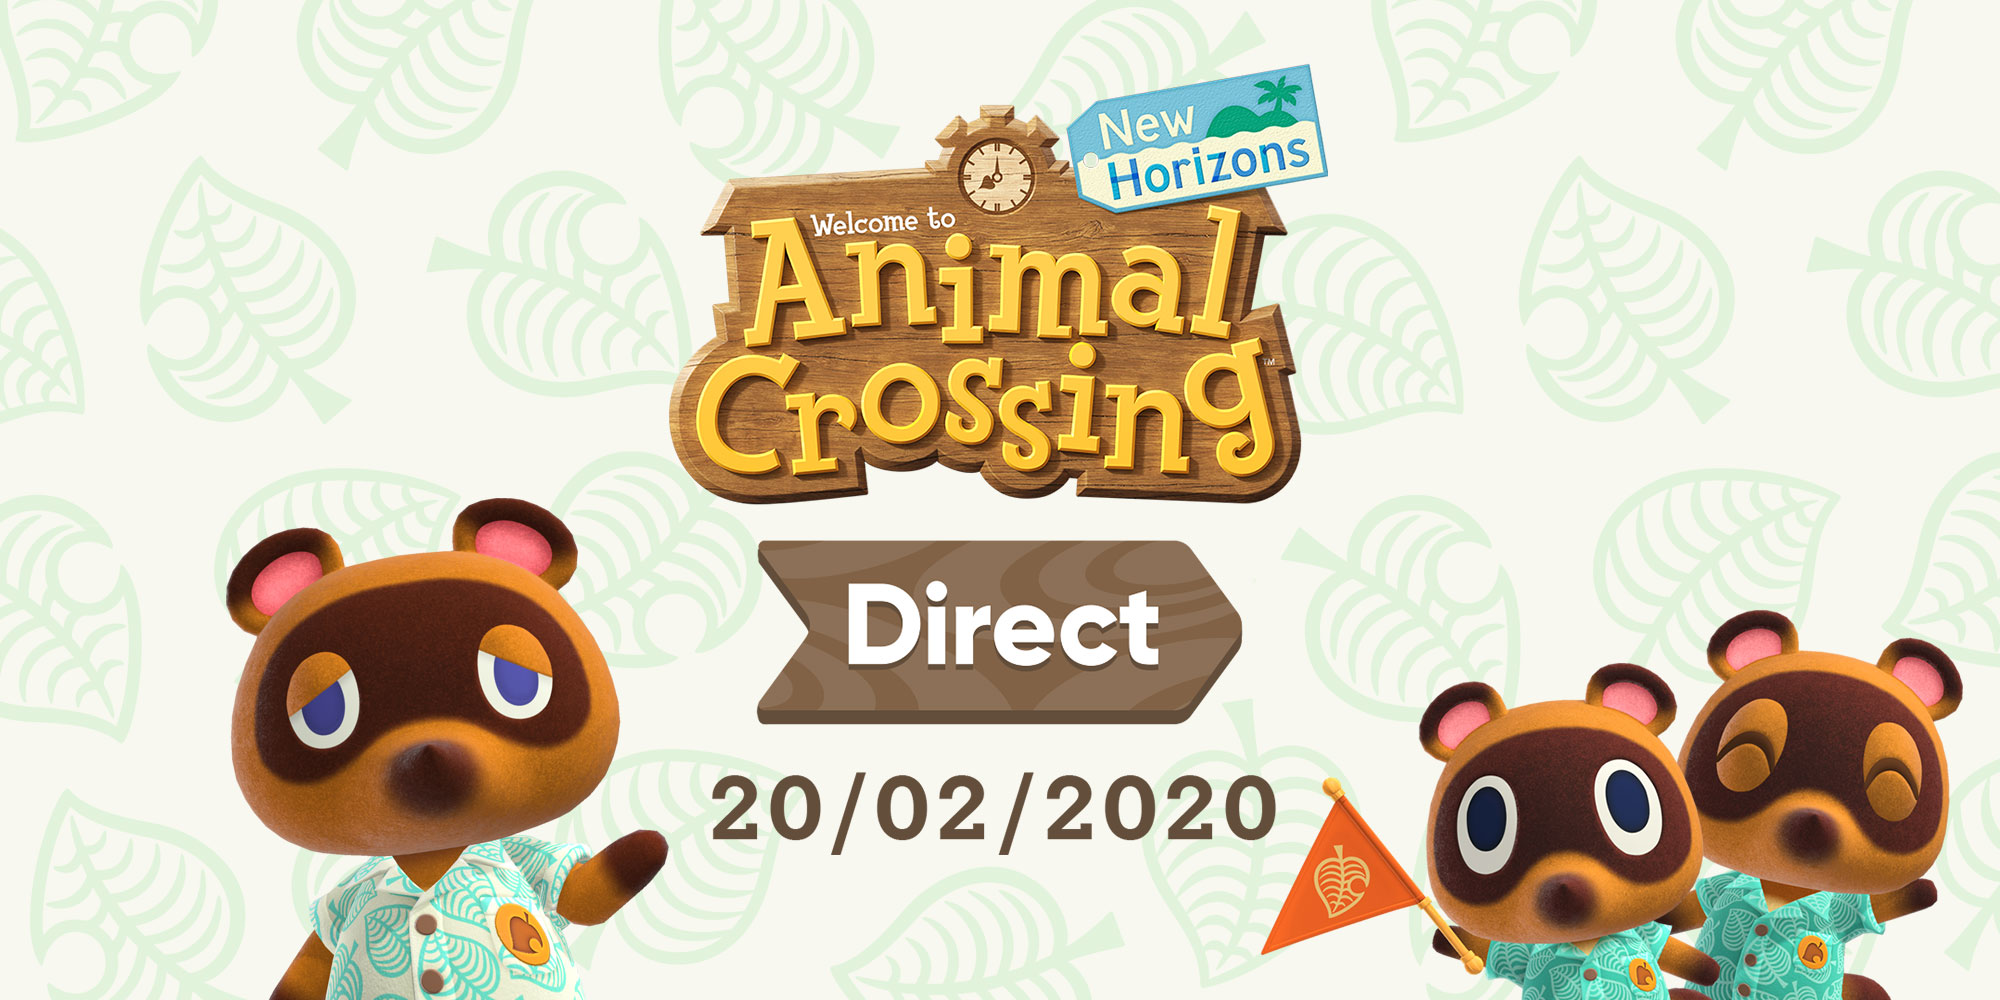 A new Animal Crossing: New Horizons Direct is airing on February 20th! |  News | Nintendo